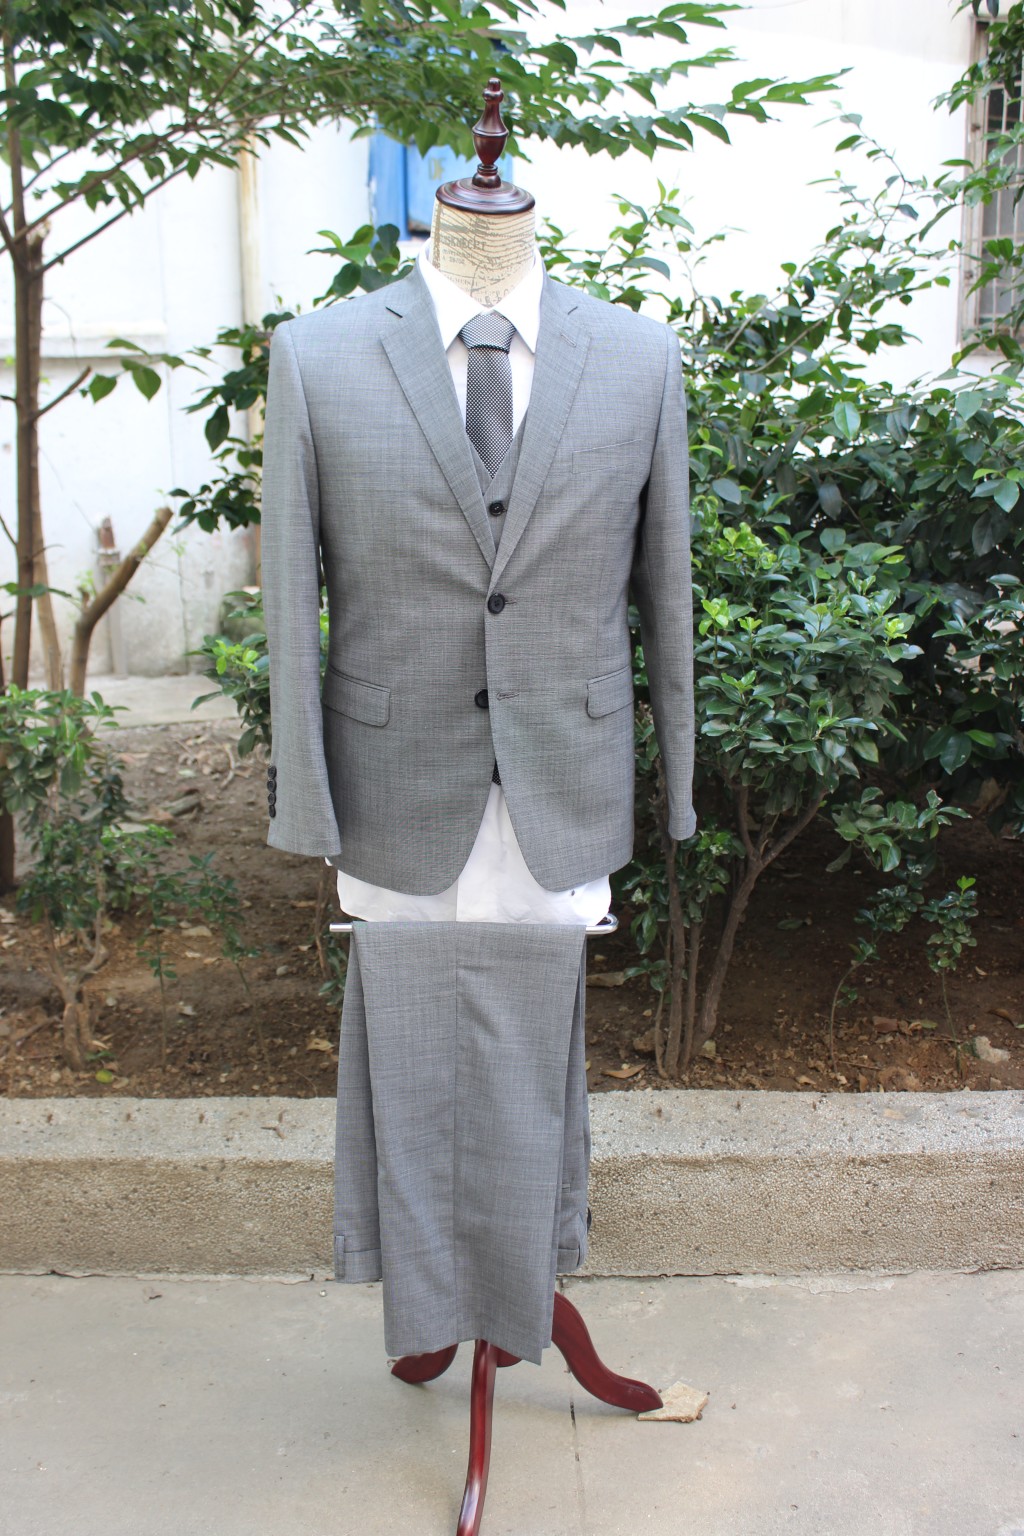 3 Pieces Gray 100% Wool Suit For Father, Bf